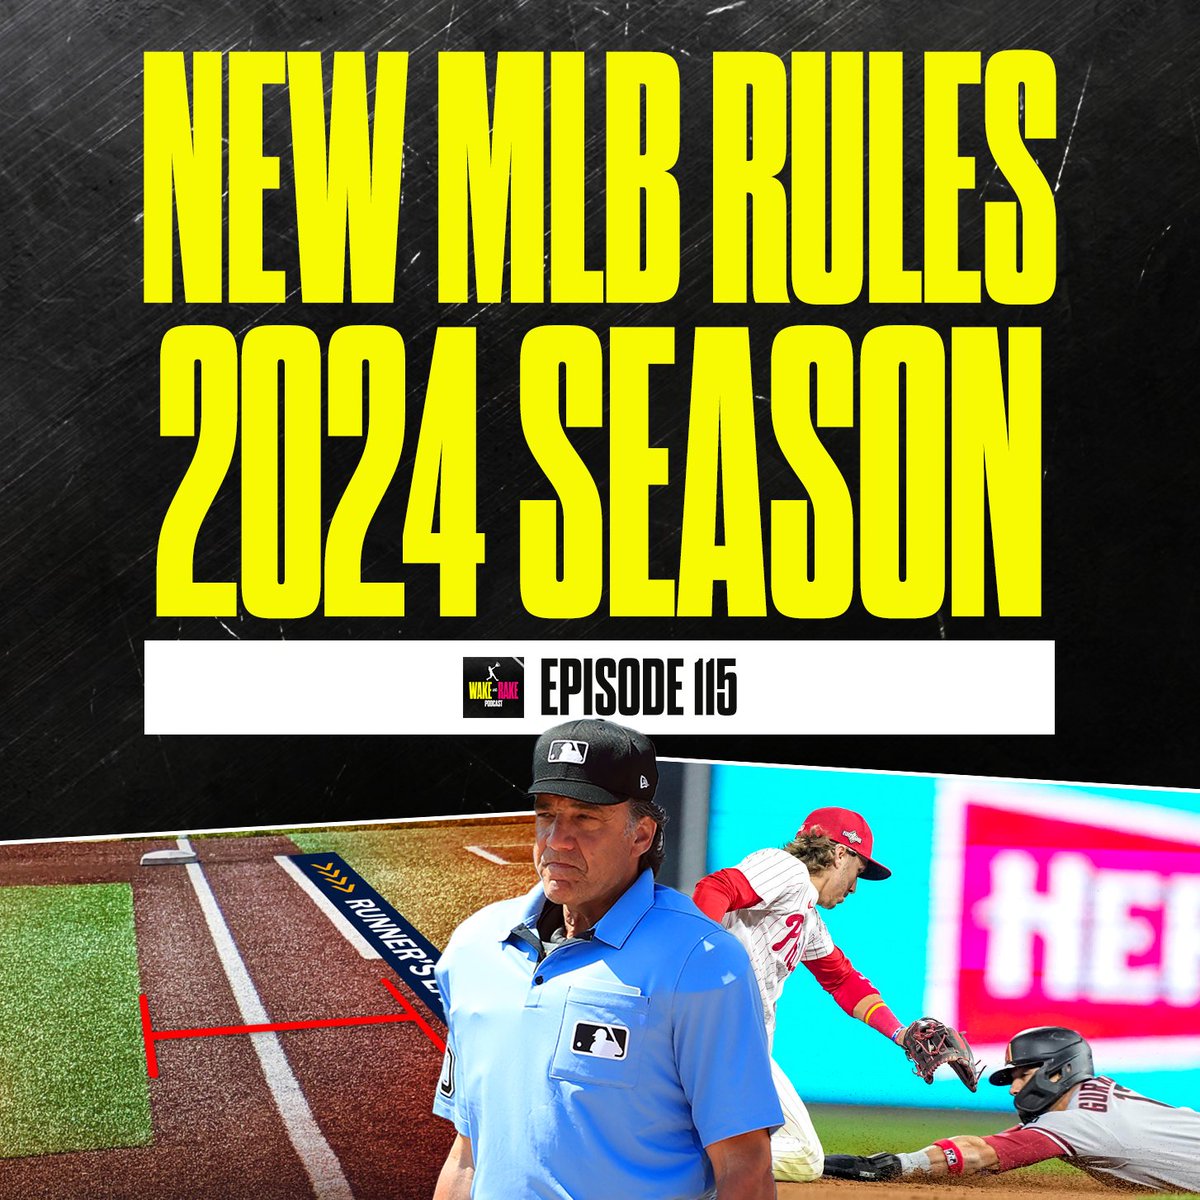 🚨 NEW EPISODE 🚨 • Obstruction rule explained ⚠️ • Pirates playoffs? 👀 • 2024 season predictions 🔮 • Bobby Witt Jr mid-pitch adjustment 🎥 • Oakland boycotts Opening Day 🥁 APPLE: podcasts.apple.com/us/podcast/wak… SPOTIFY: open.spotify.com/episode/4evBTW… YT: youtu.be/Hlp5nFJLPxQ?si…